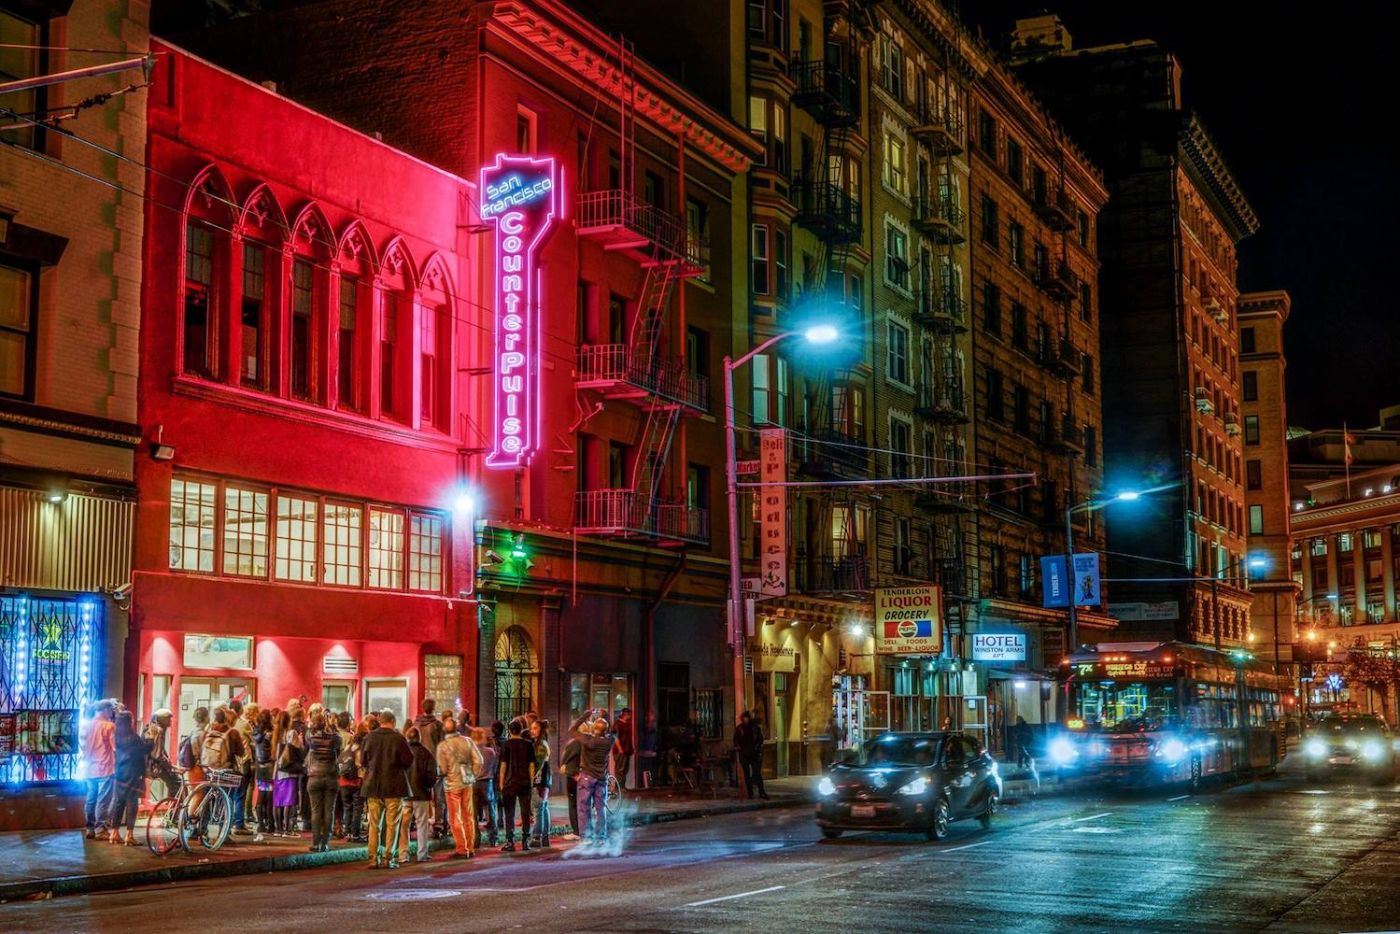 Alt text: A crowd gathers on the street outside a building at night, illuminated by a neon pink sign that reads “San Francisco CounterPulse”